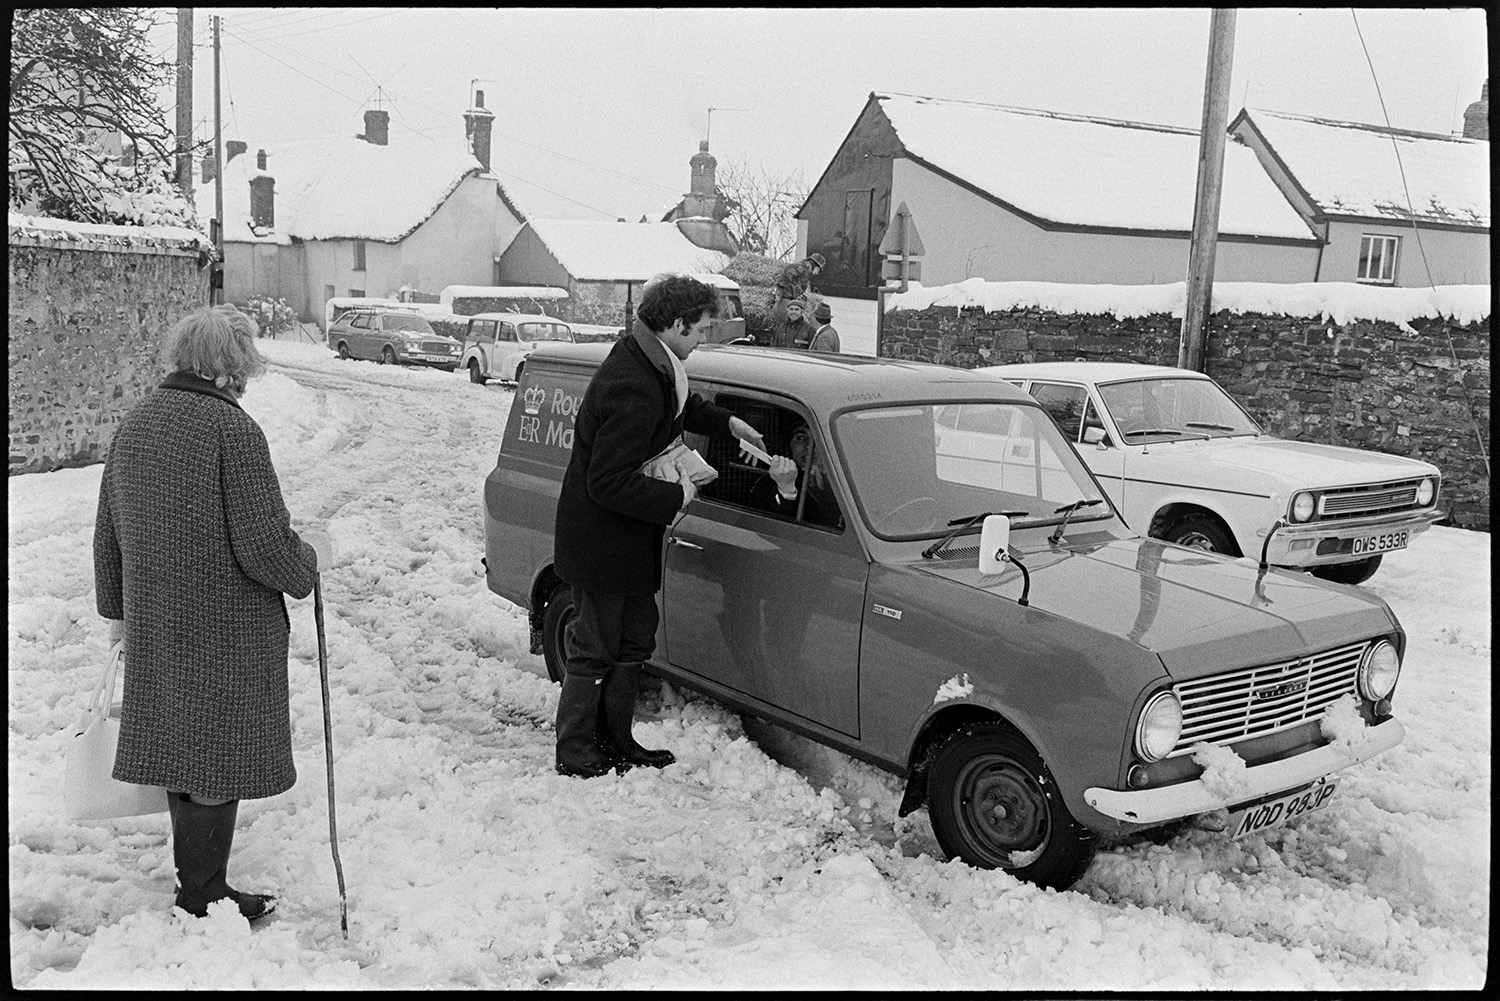 Snow, street scenes, postman handing out mail, shoppers, etc. Tractor and link box. 
[A Royal Mail post van in a snowy street in Dolton. The person in the van is handing a letter to a man, and a woman is watching on. Houses and parked cars covered in snow can be seen in the background.]